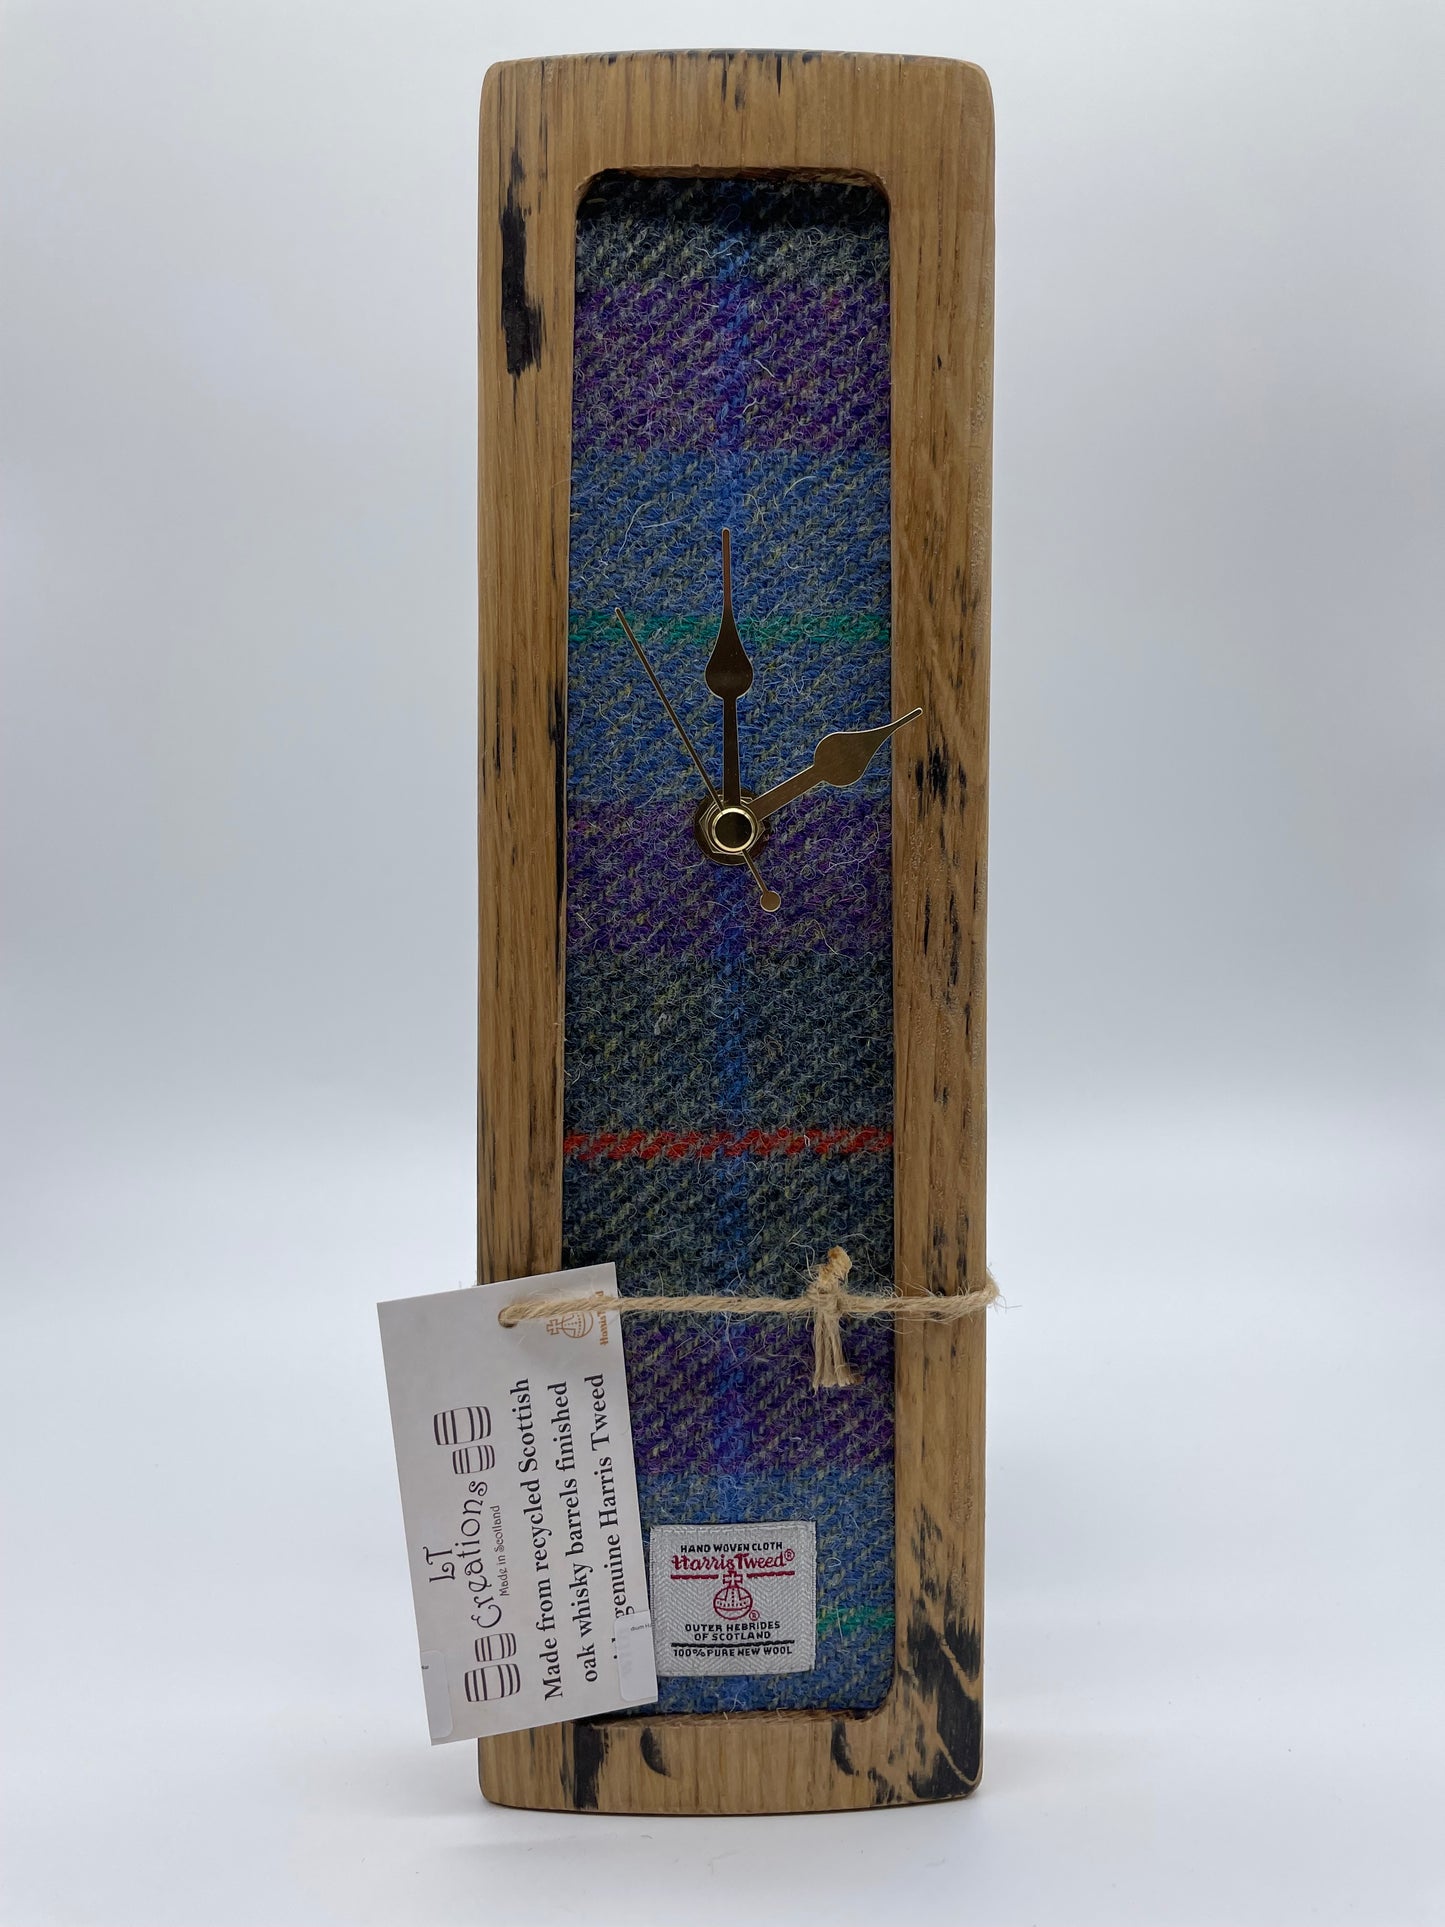 Medium Hanging Wall Clock Made From Reclaimed Oak Whisky Barrels With Purple/Green Check Harris Tweed